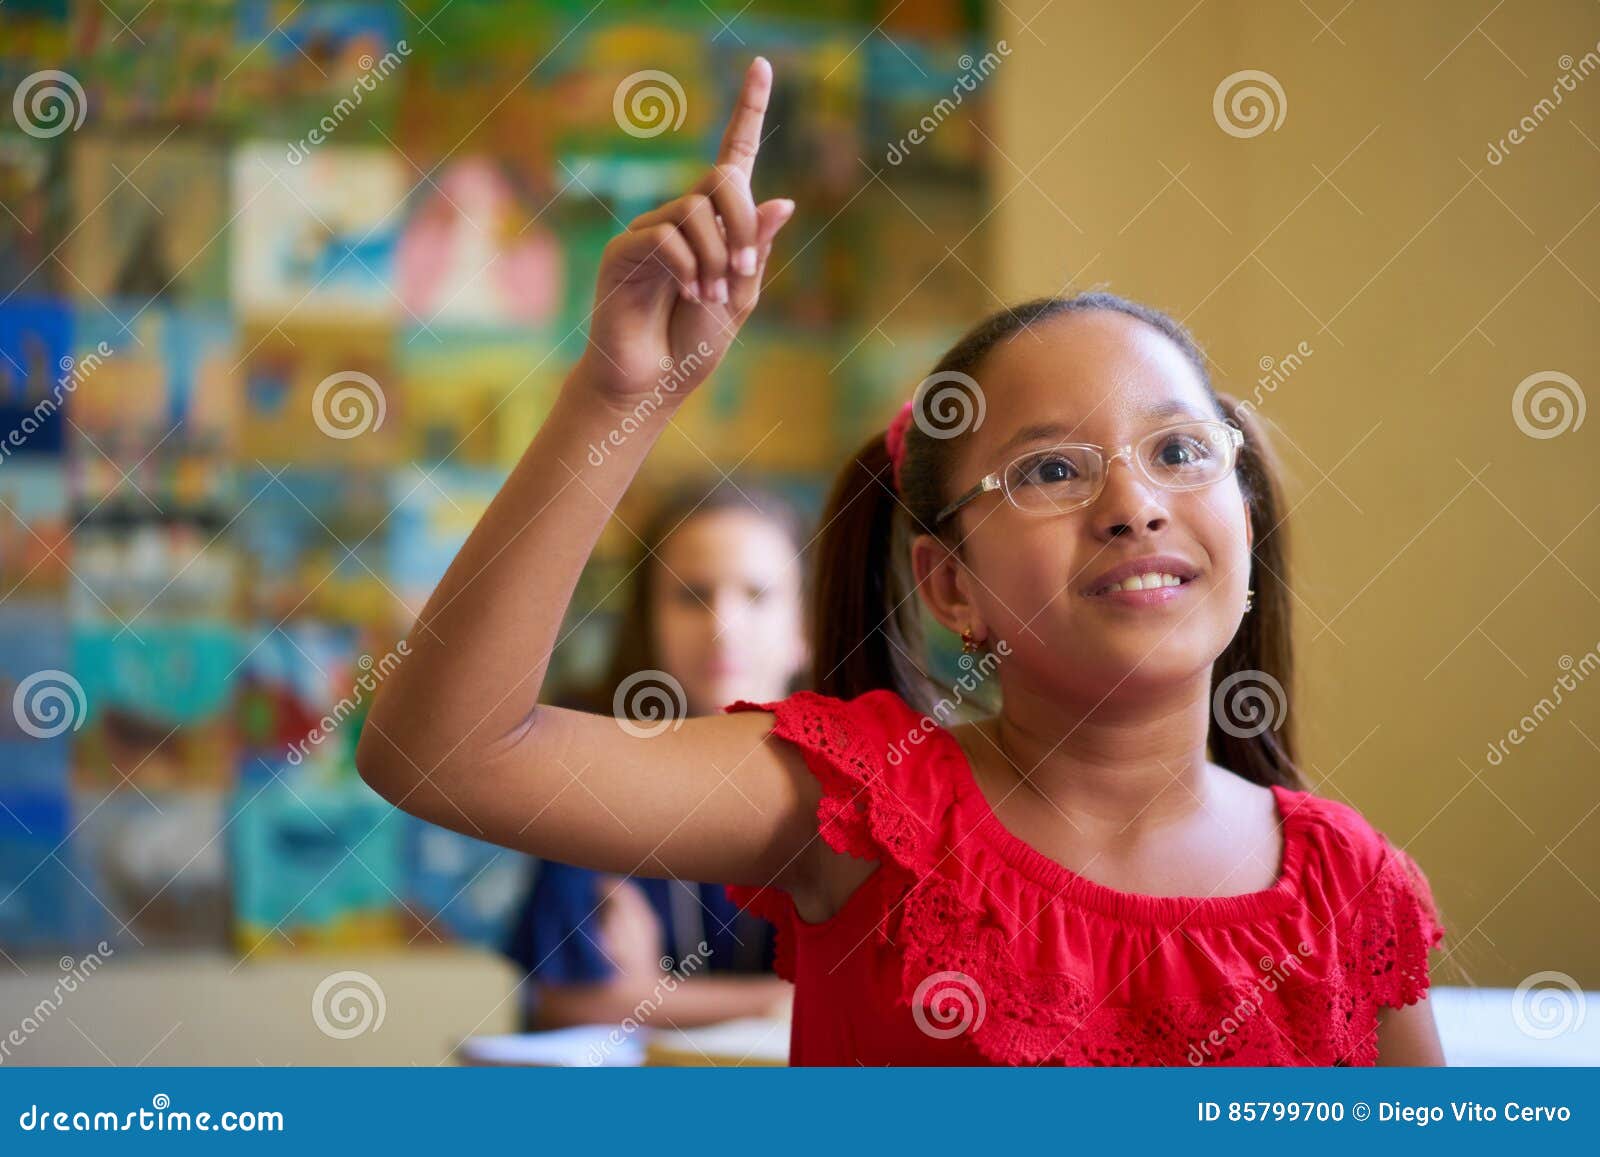 female student raising hand during test in class at school